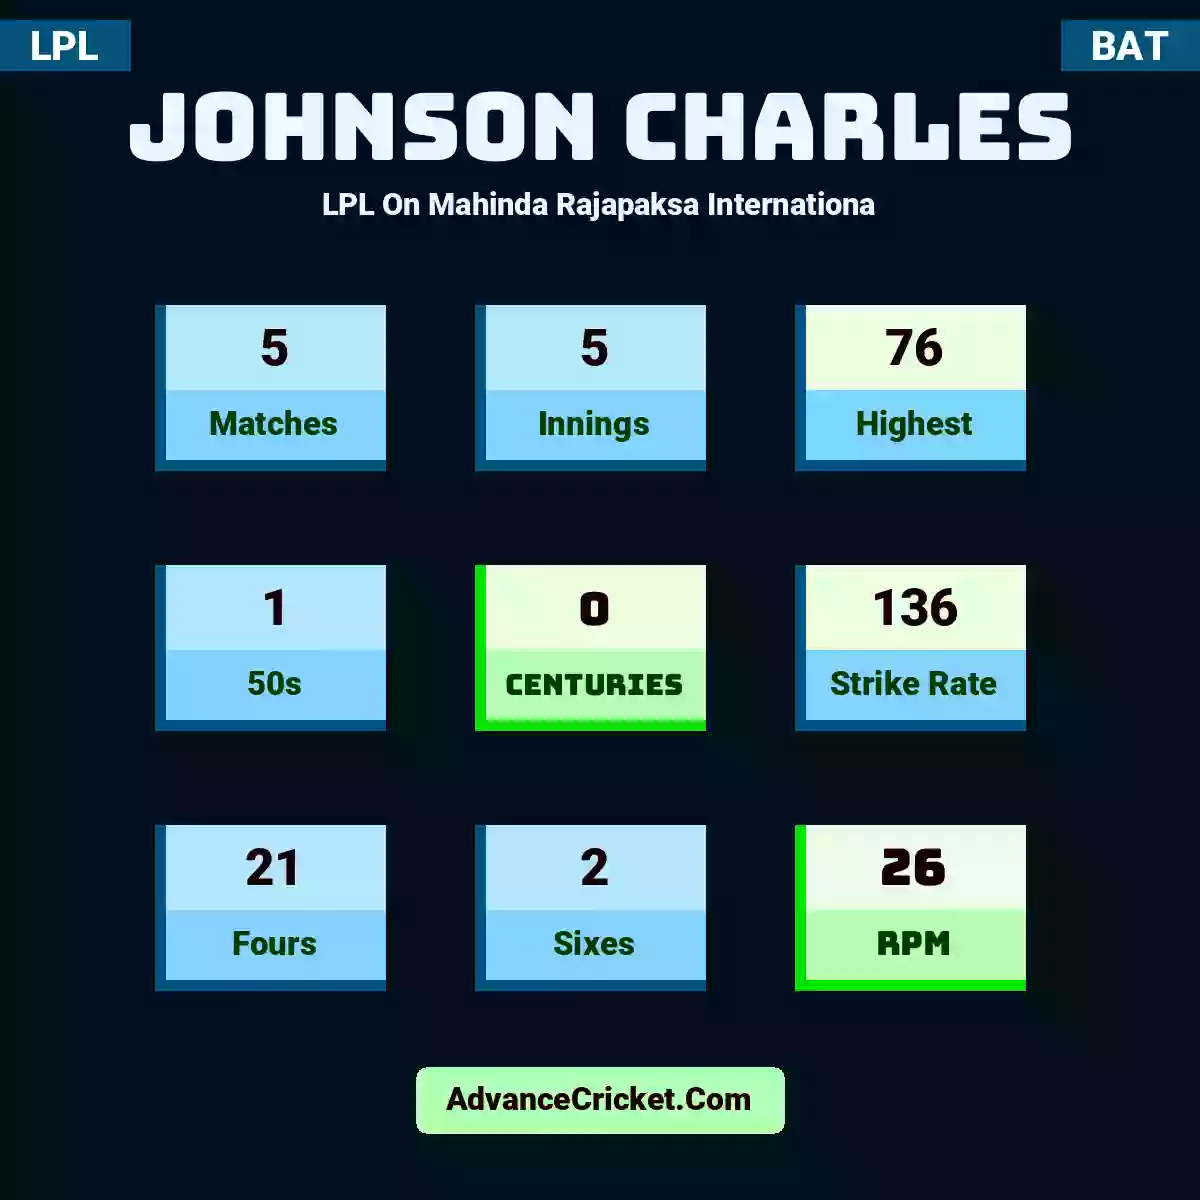 Johnson Charles LPL  On Mahinda Rajapaksa Internationa, Johnson Charles played 5 matches, scored 76 runs as highest, 1 half-centuries, and 0 centuries, with a strike rate of 136. J.Charles hit 21 fours and 2 sixes, with an RPM of 26.